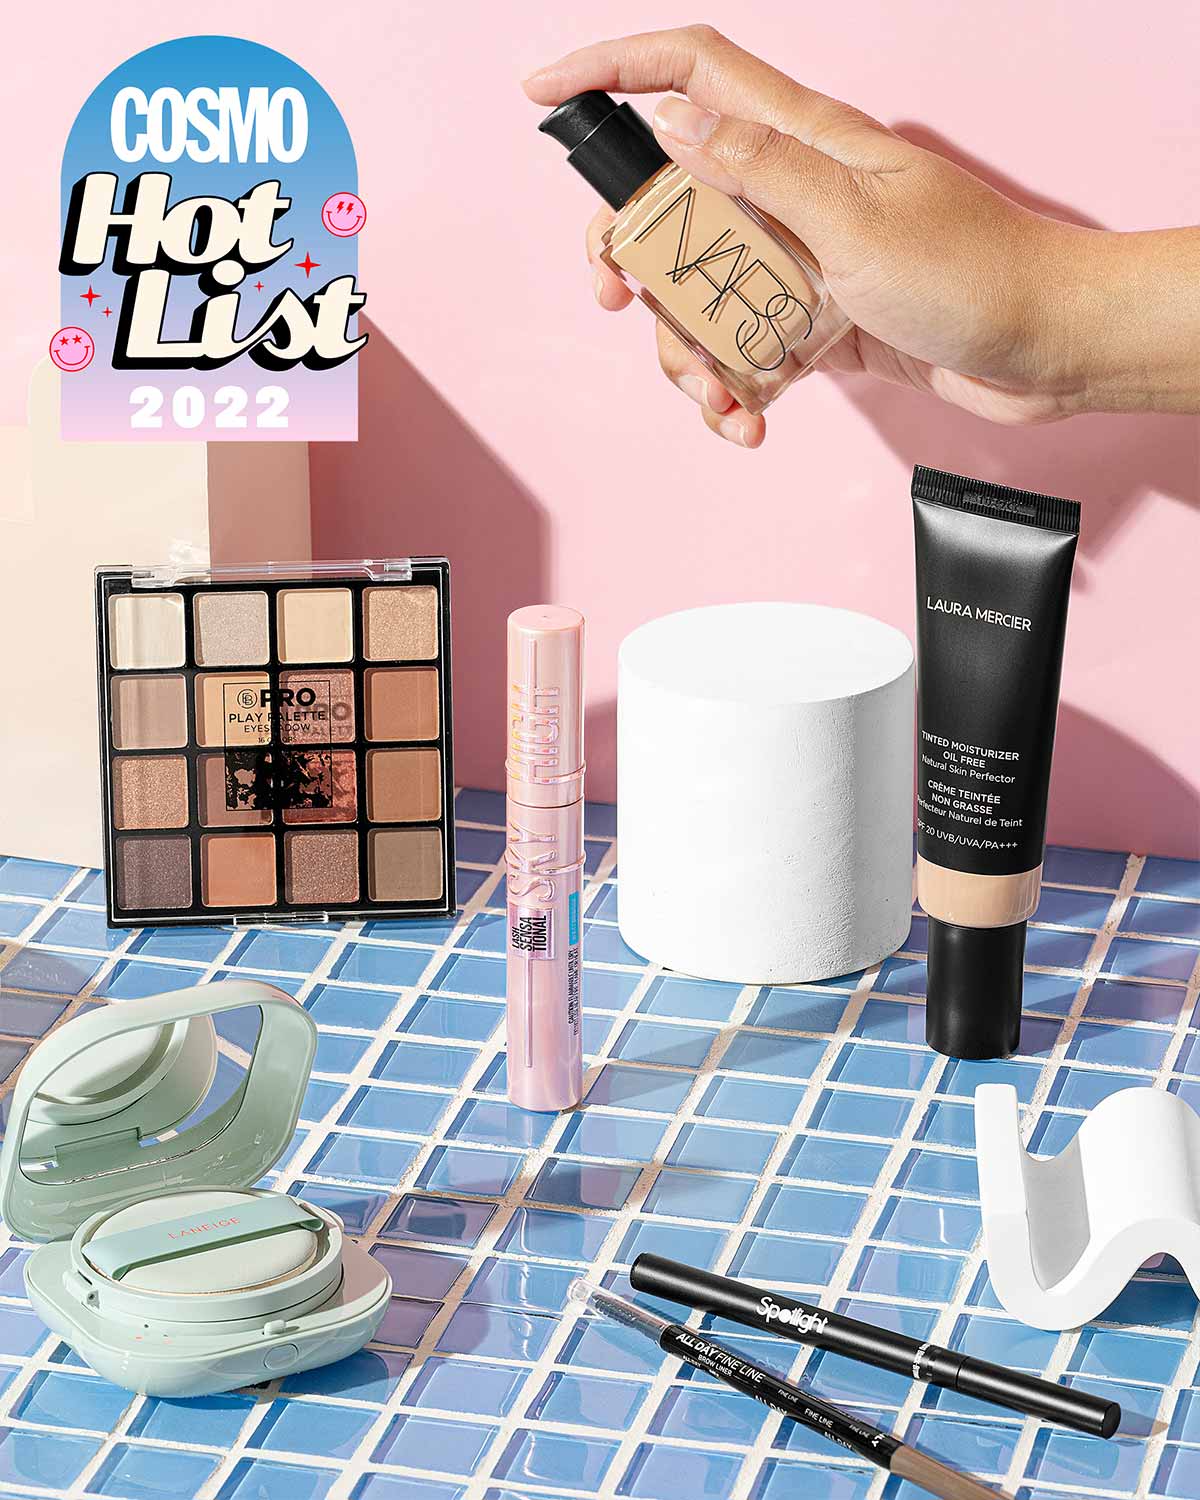 cosmo ph hot list 2022 - best makeup products